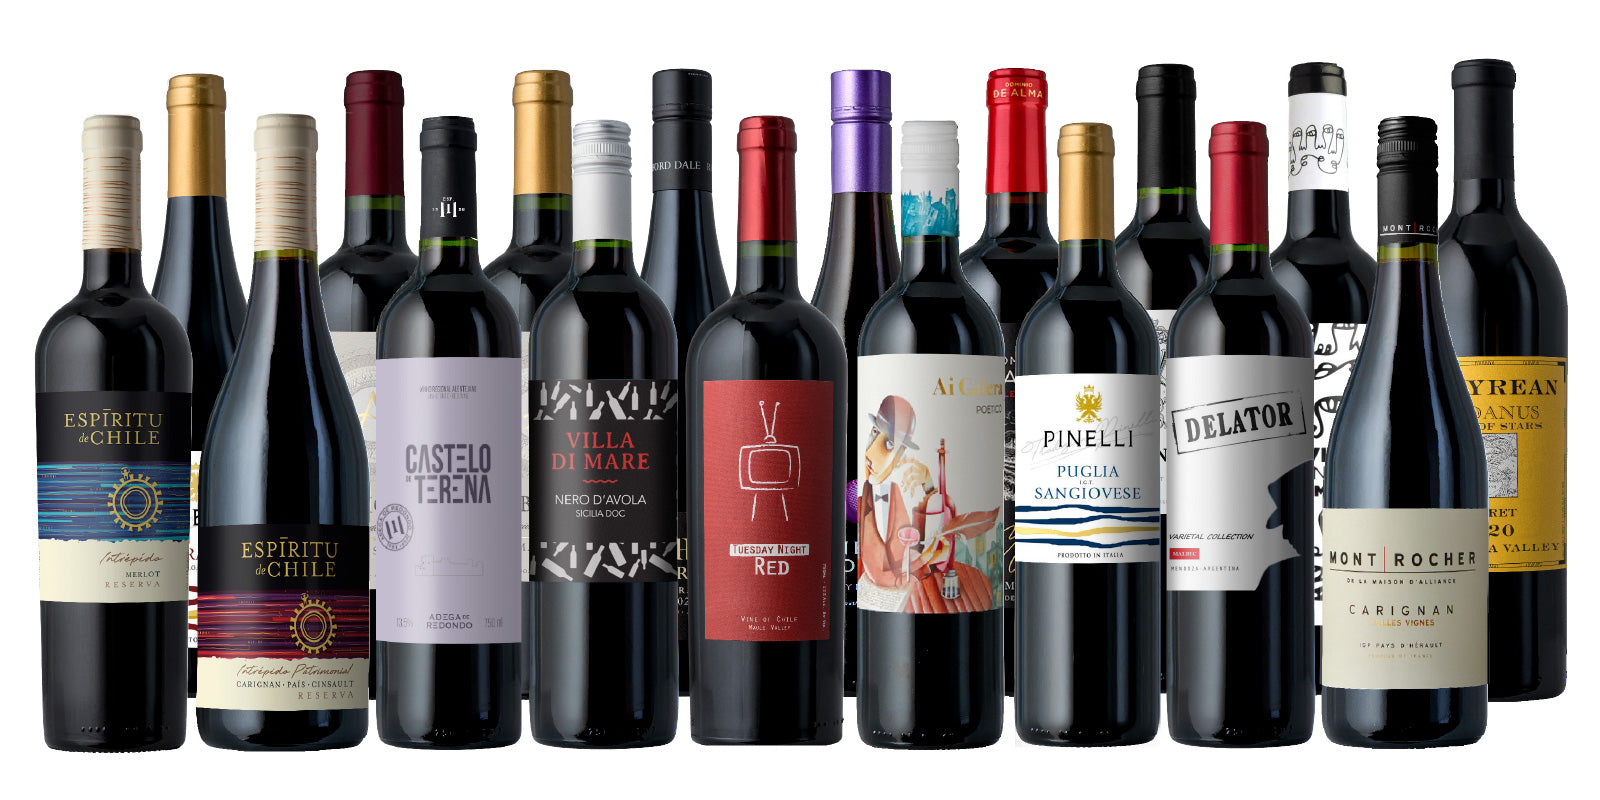 UPGRADE: The Holiday's Biggest Top-Shelf Red Wine Sale Ever 2022!